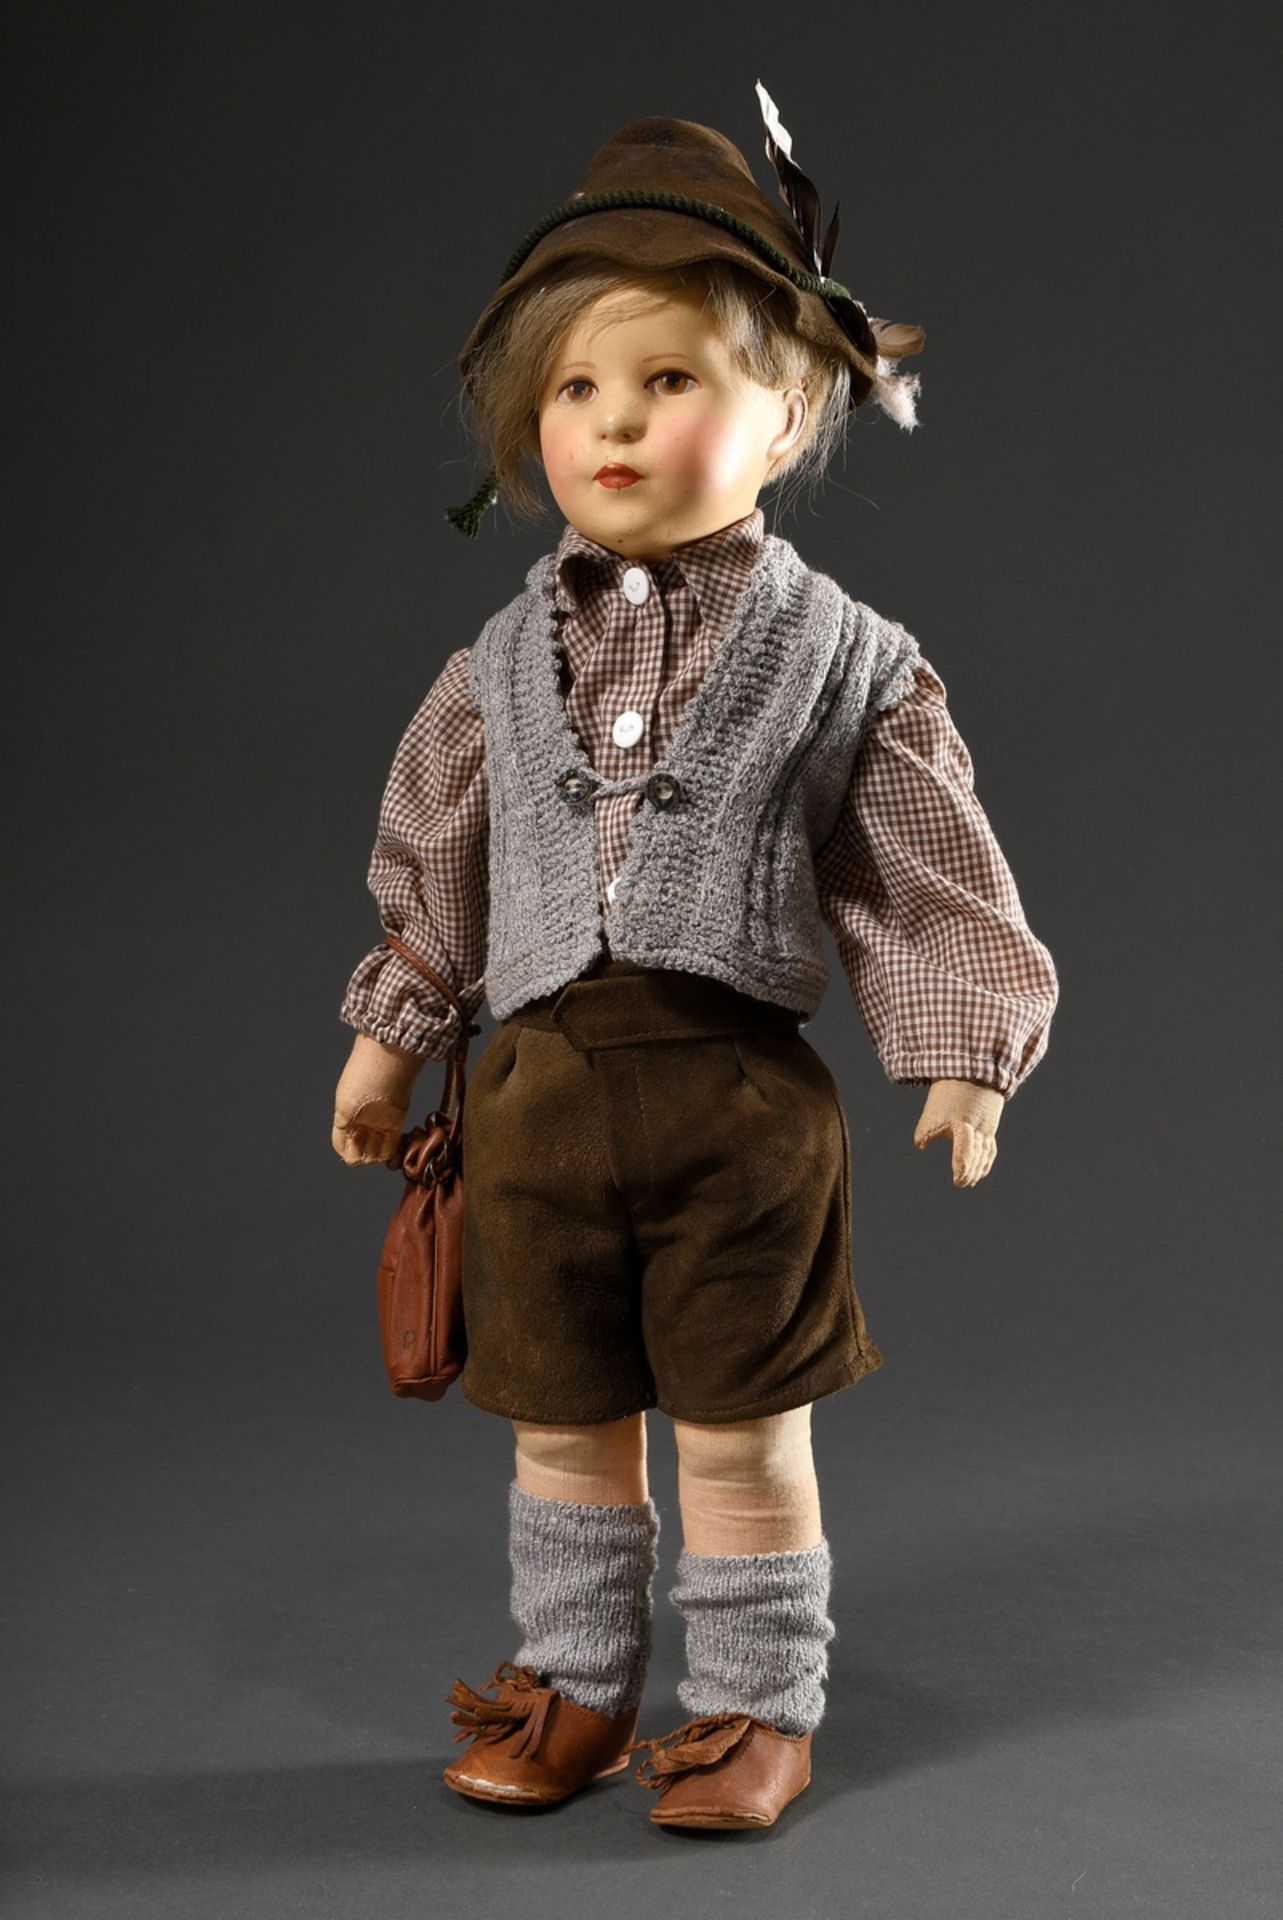 Käthe Kruse doll "Friedebald", mass crank head with real hair wig, nettle body, in traditional cost